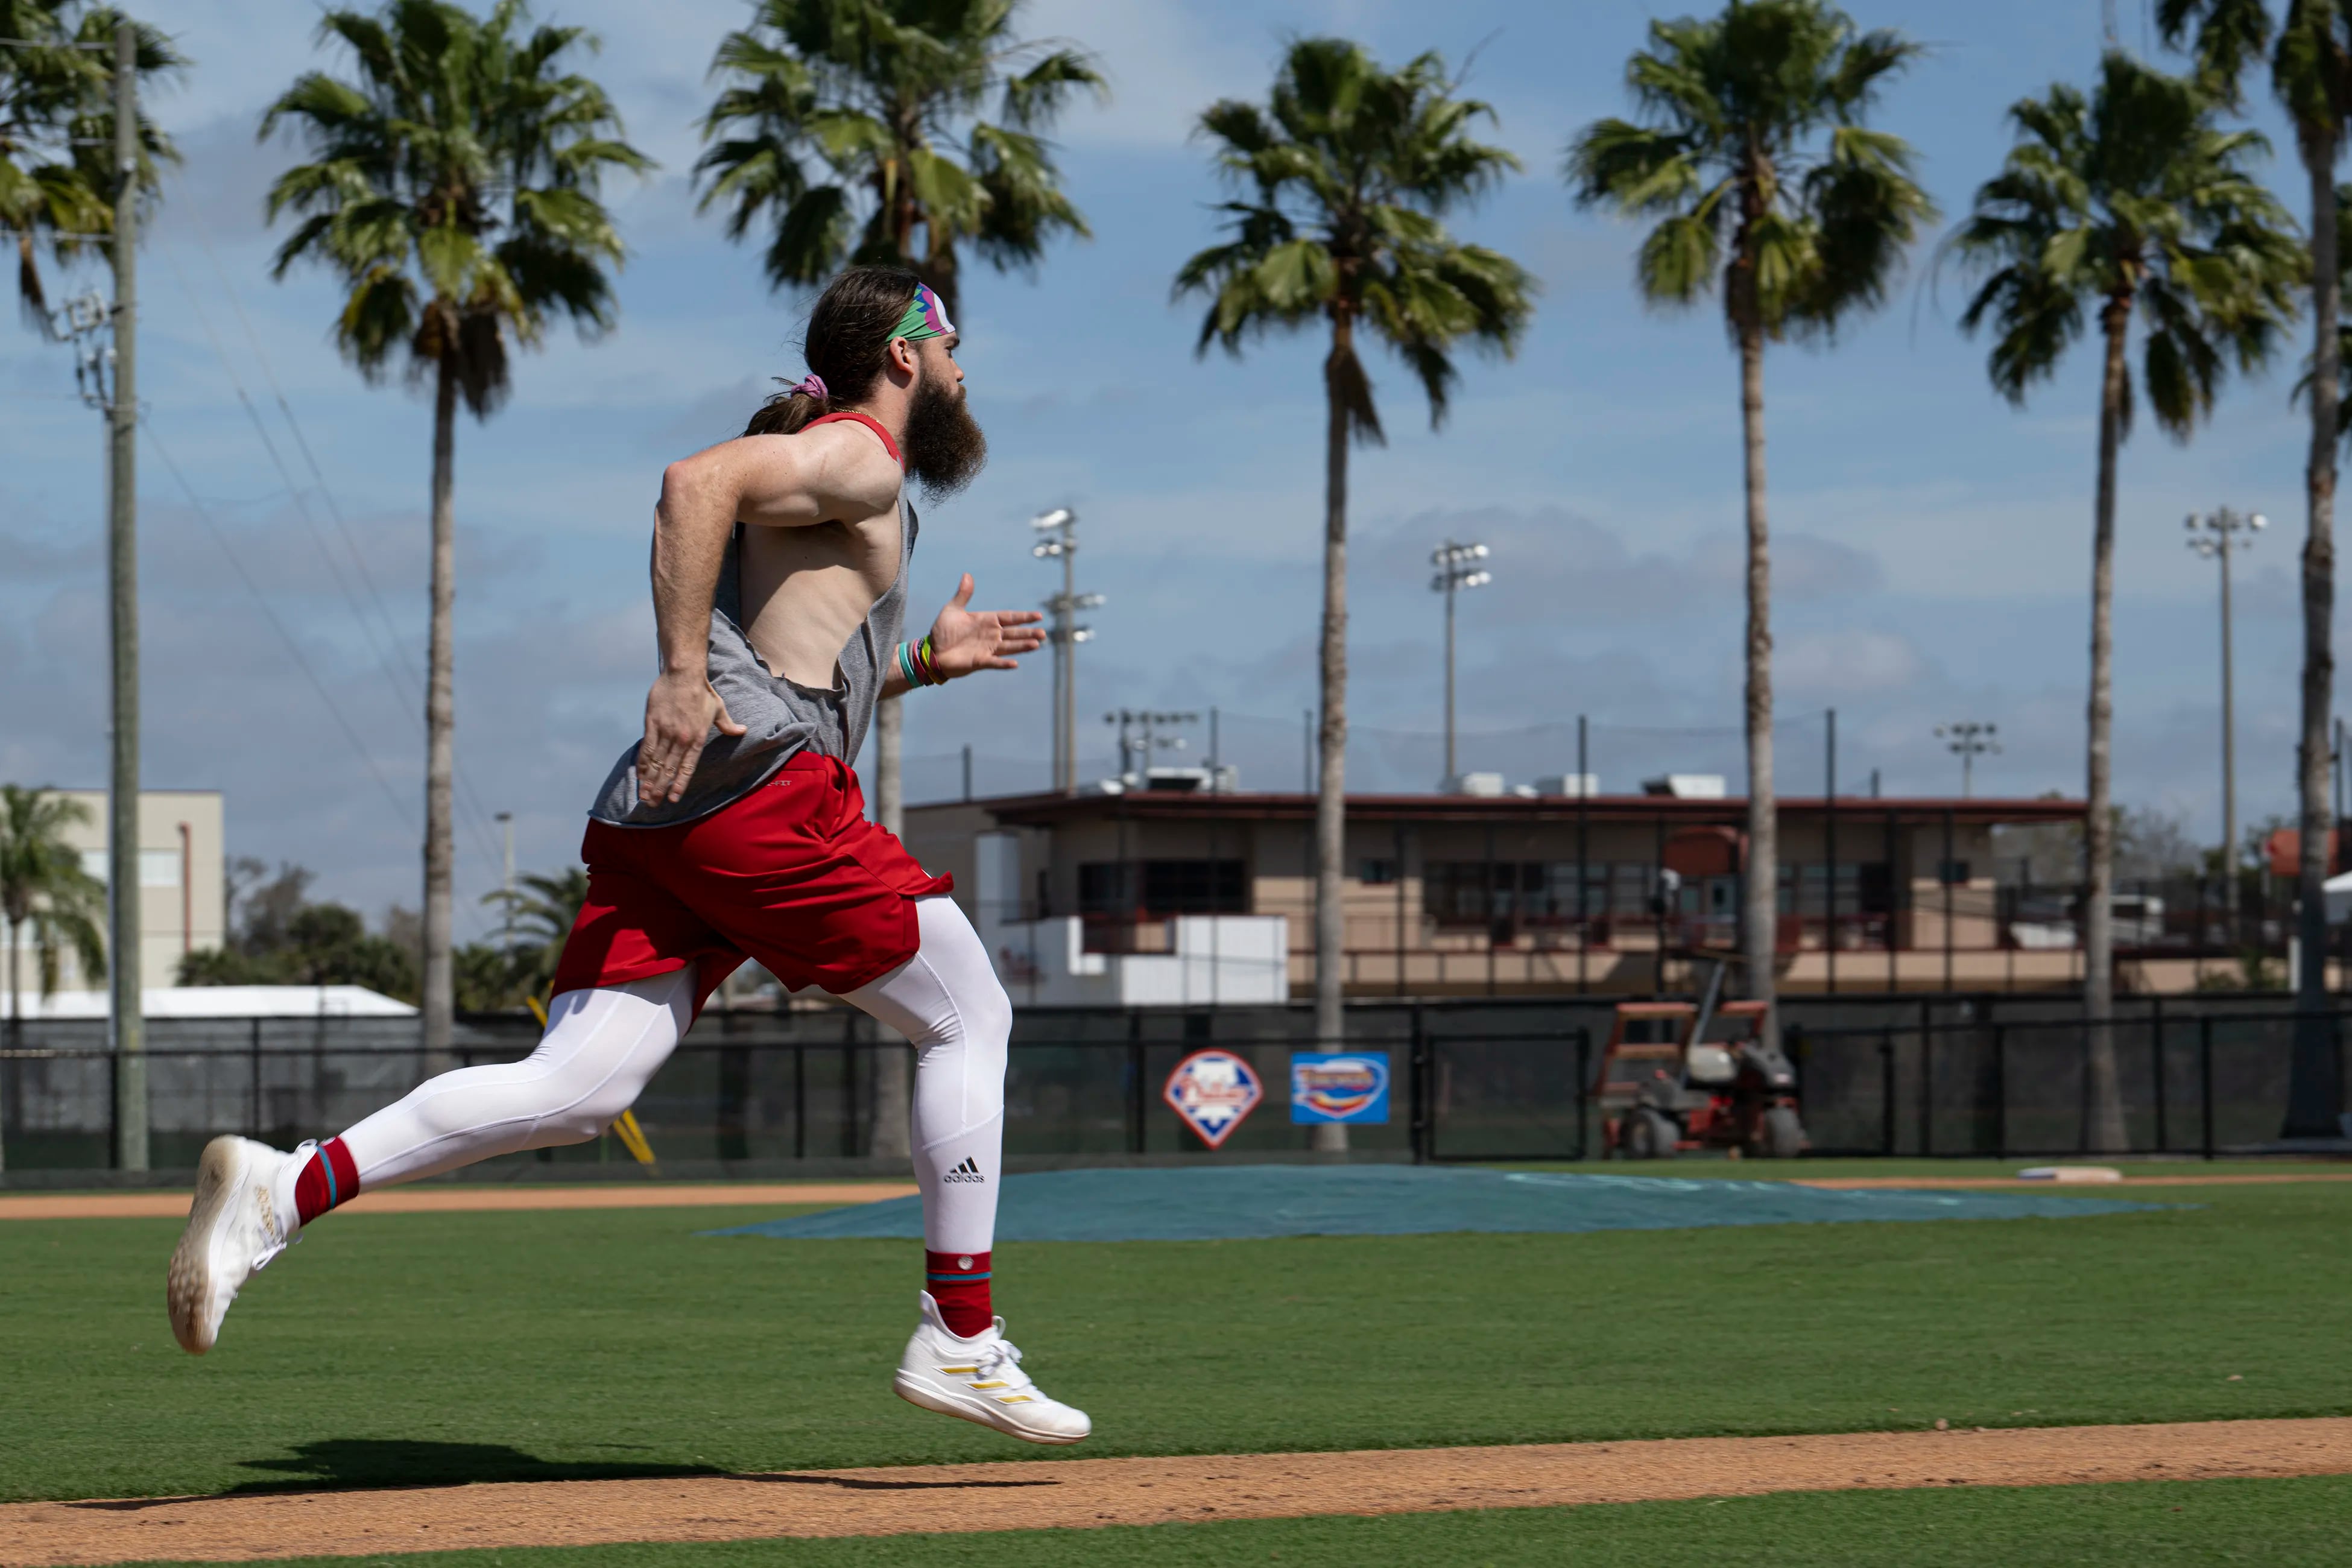 See photos from Monday's Phillies spring training workout